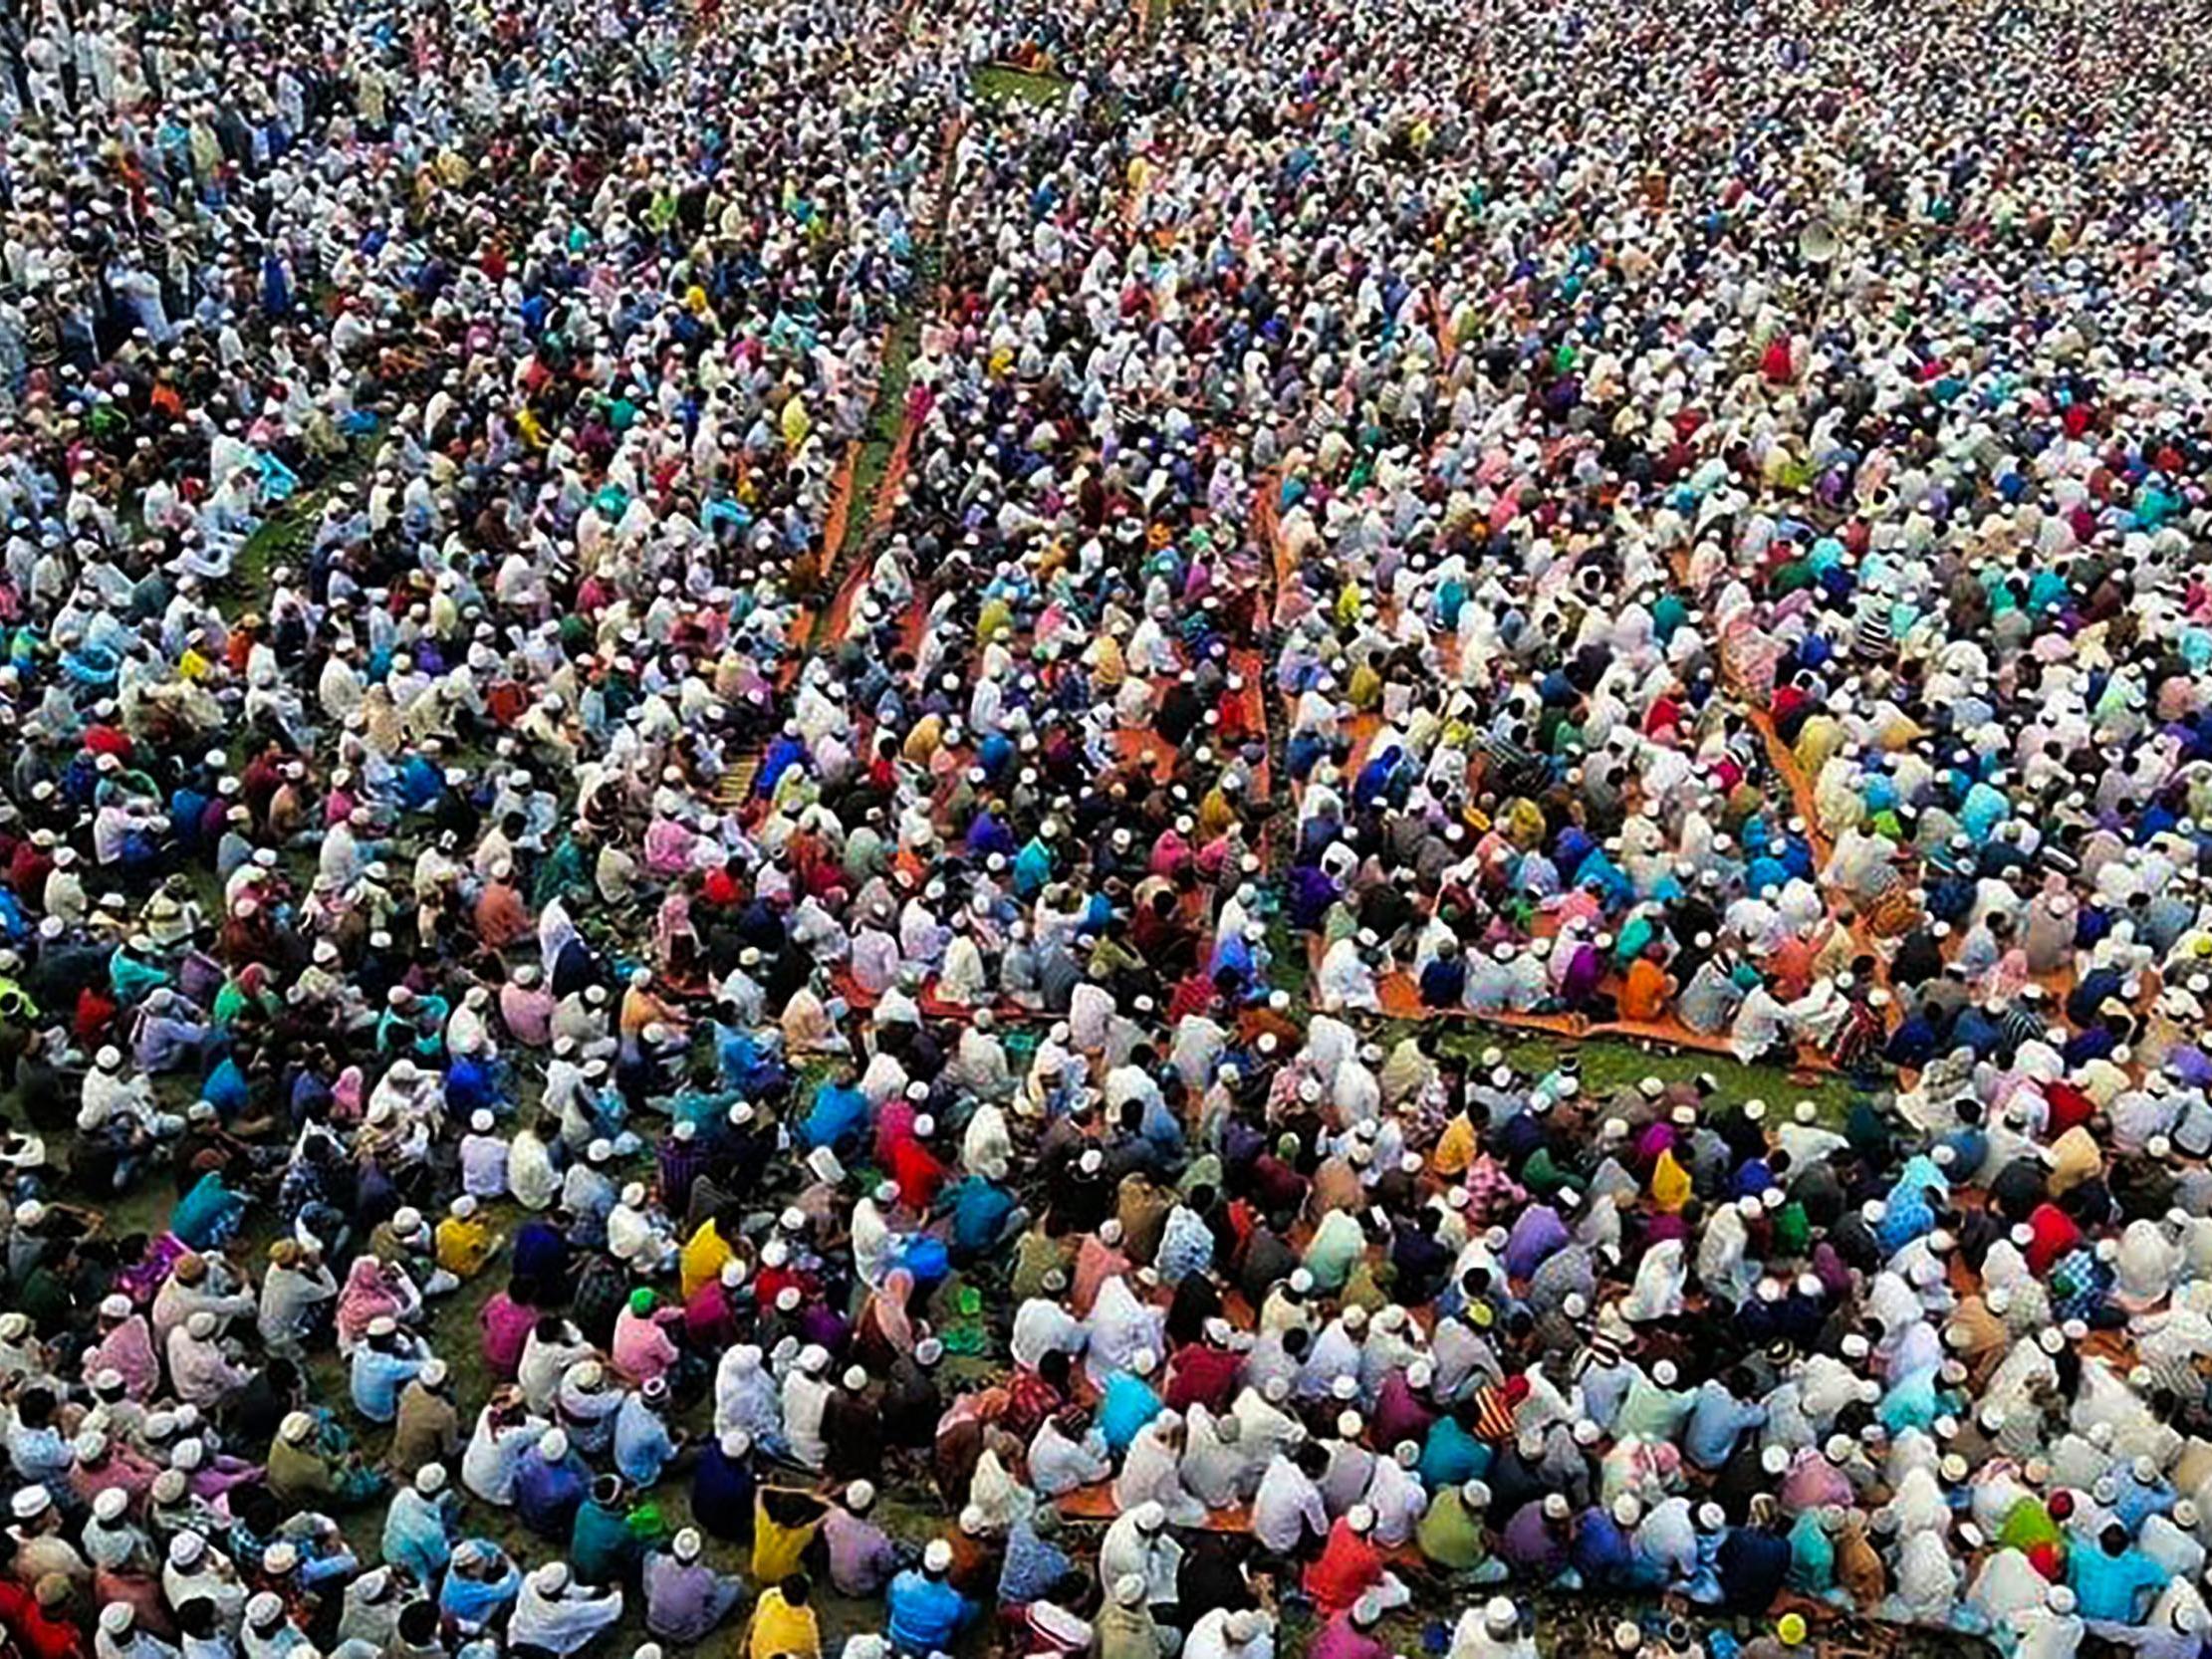 Thousands of Muslims attend a prayer session asking for safety amid concerns over the spread of the COVID-19 novel coronavirus, near Raipur in Lakshmipur district